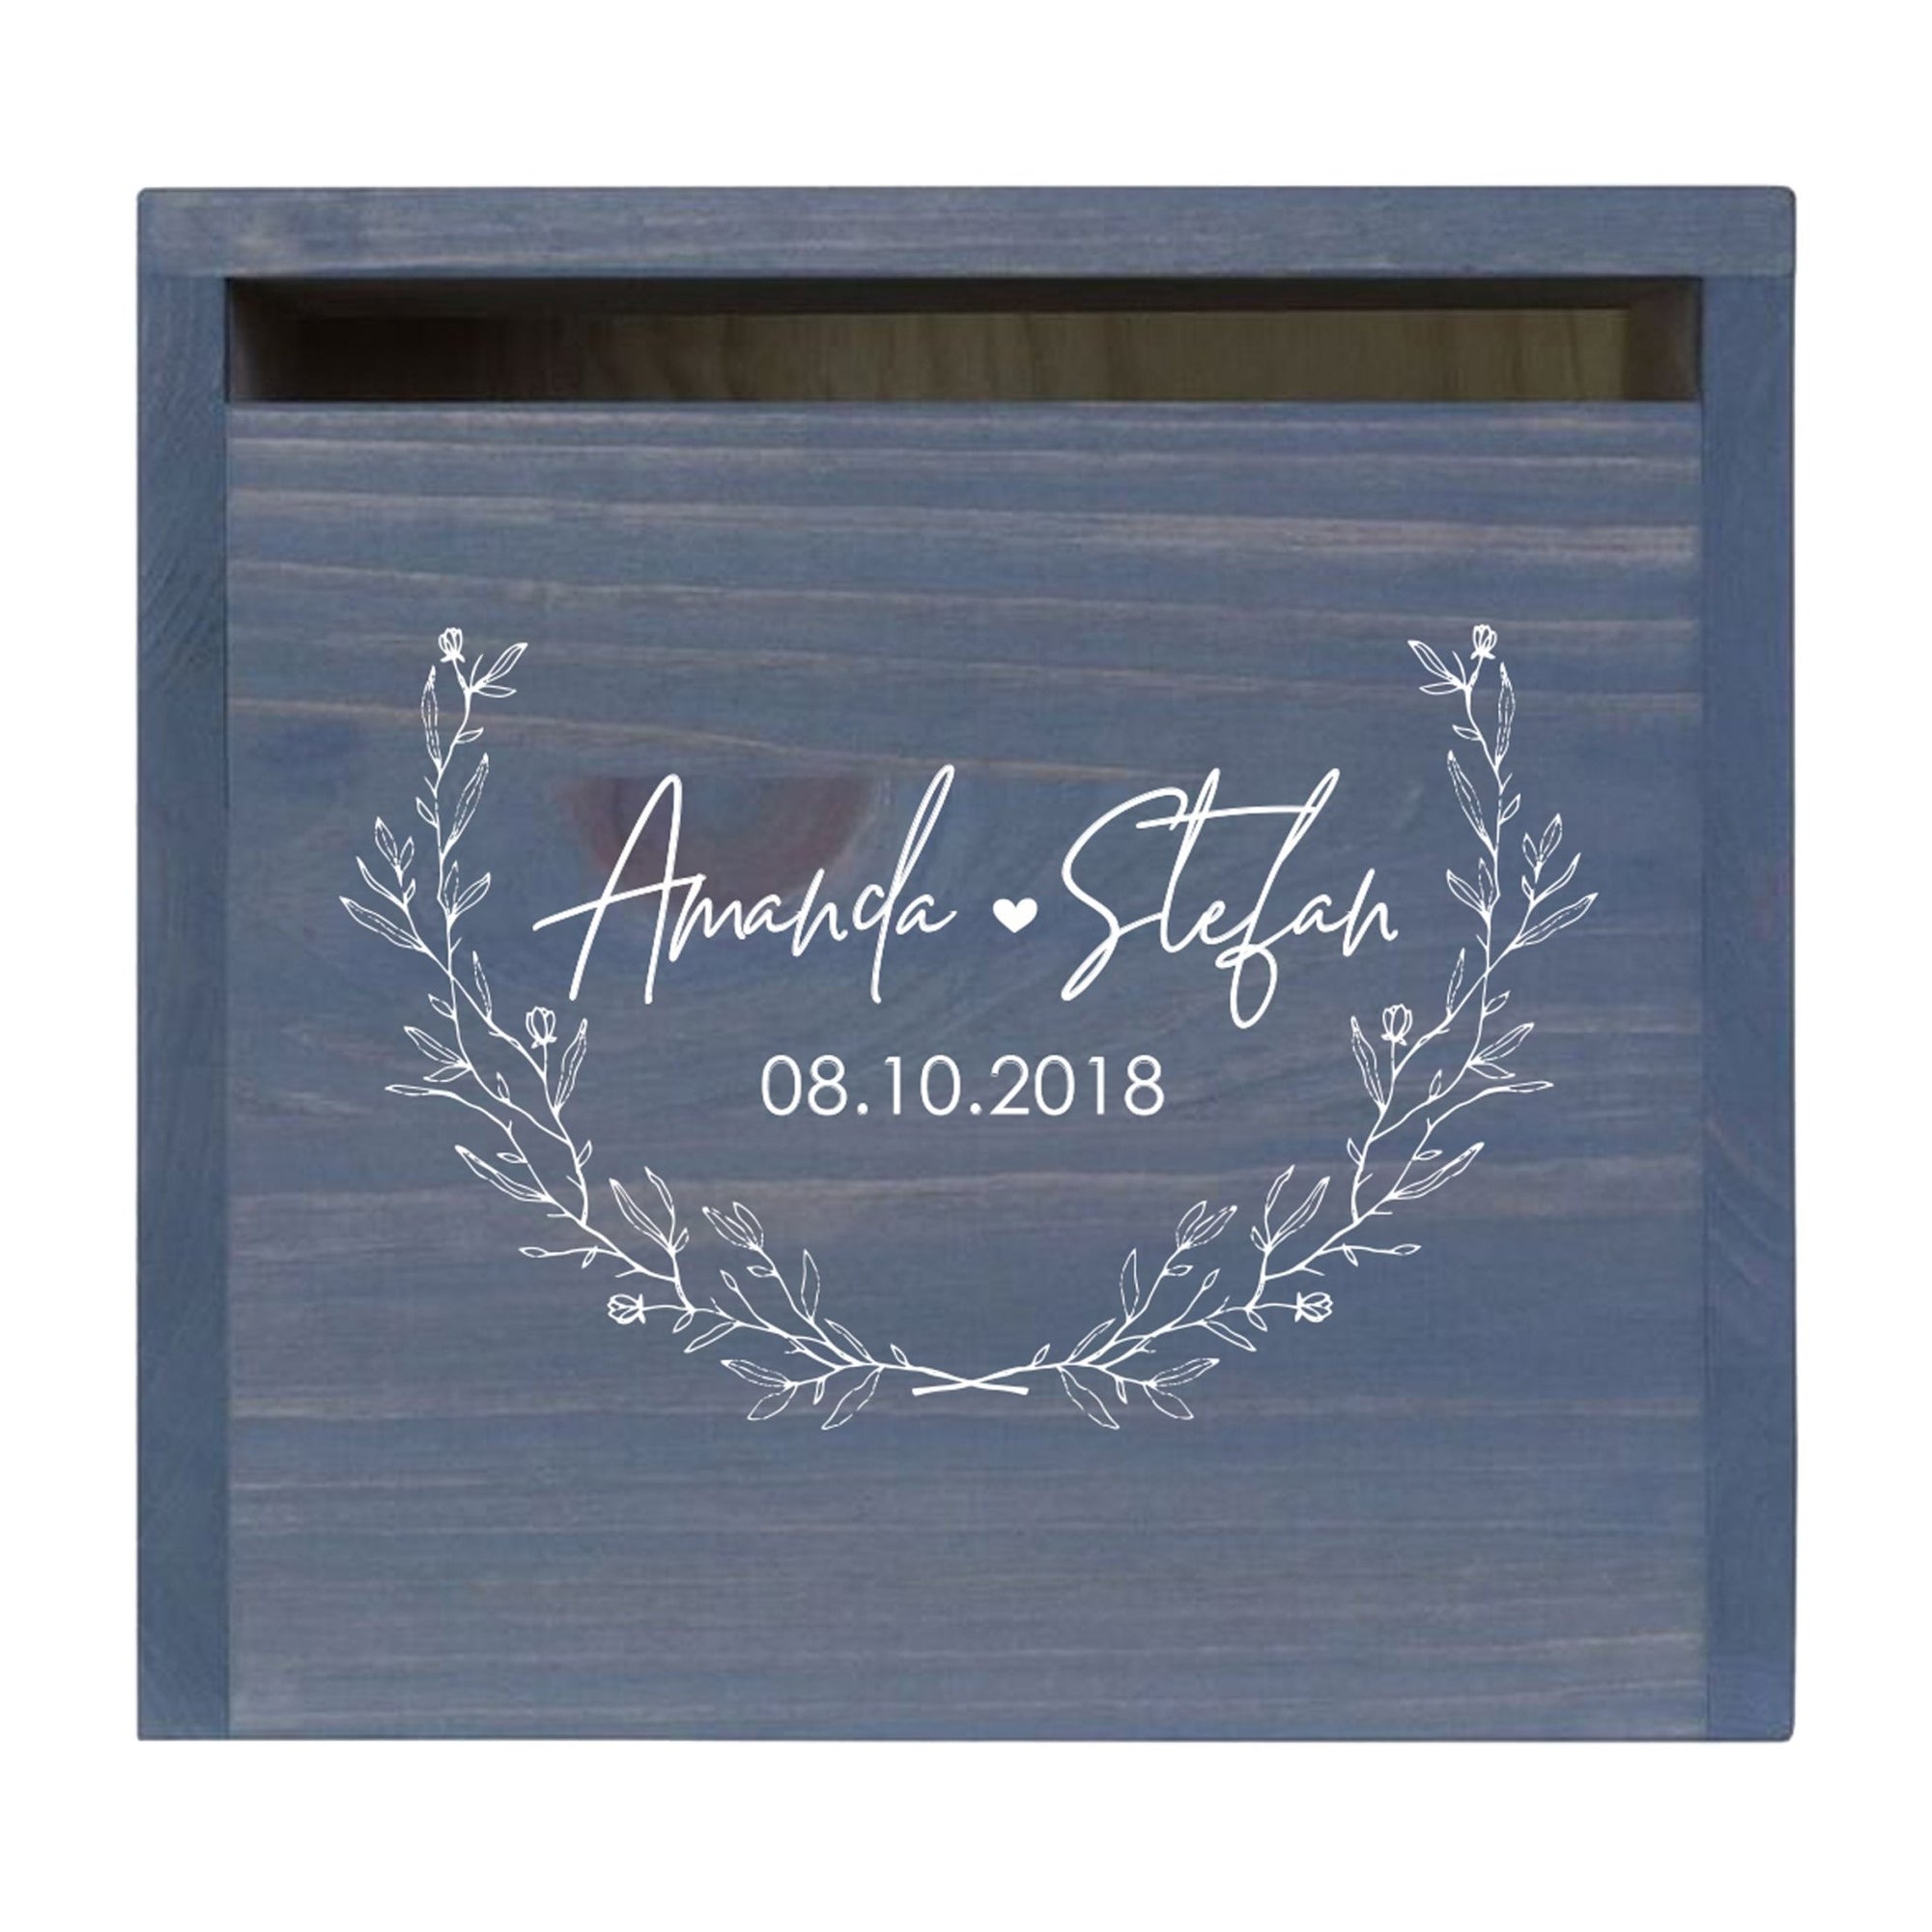 Personalized Wooden Card Box for Wedding Ceremonies, Venues, Receptions, Bridal Showers, and Engagement Parties 13.5x12 - Amanda & Stefan (Leaves) - LifeSong Milestones